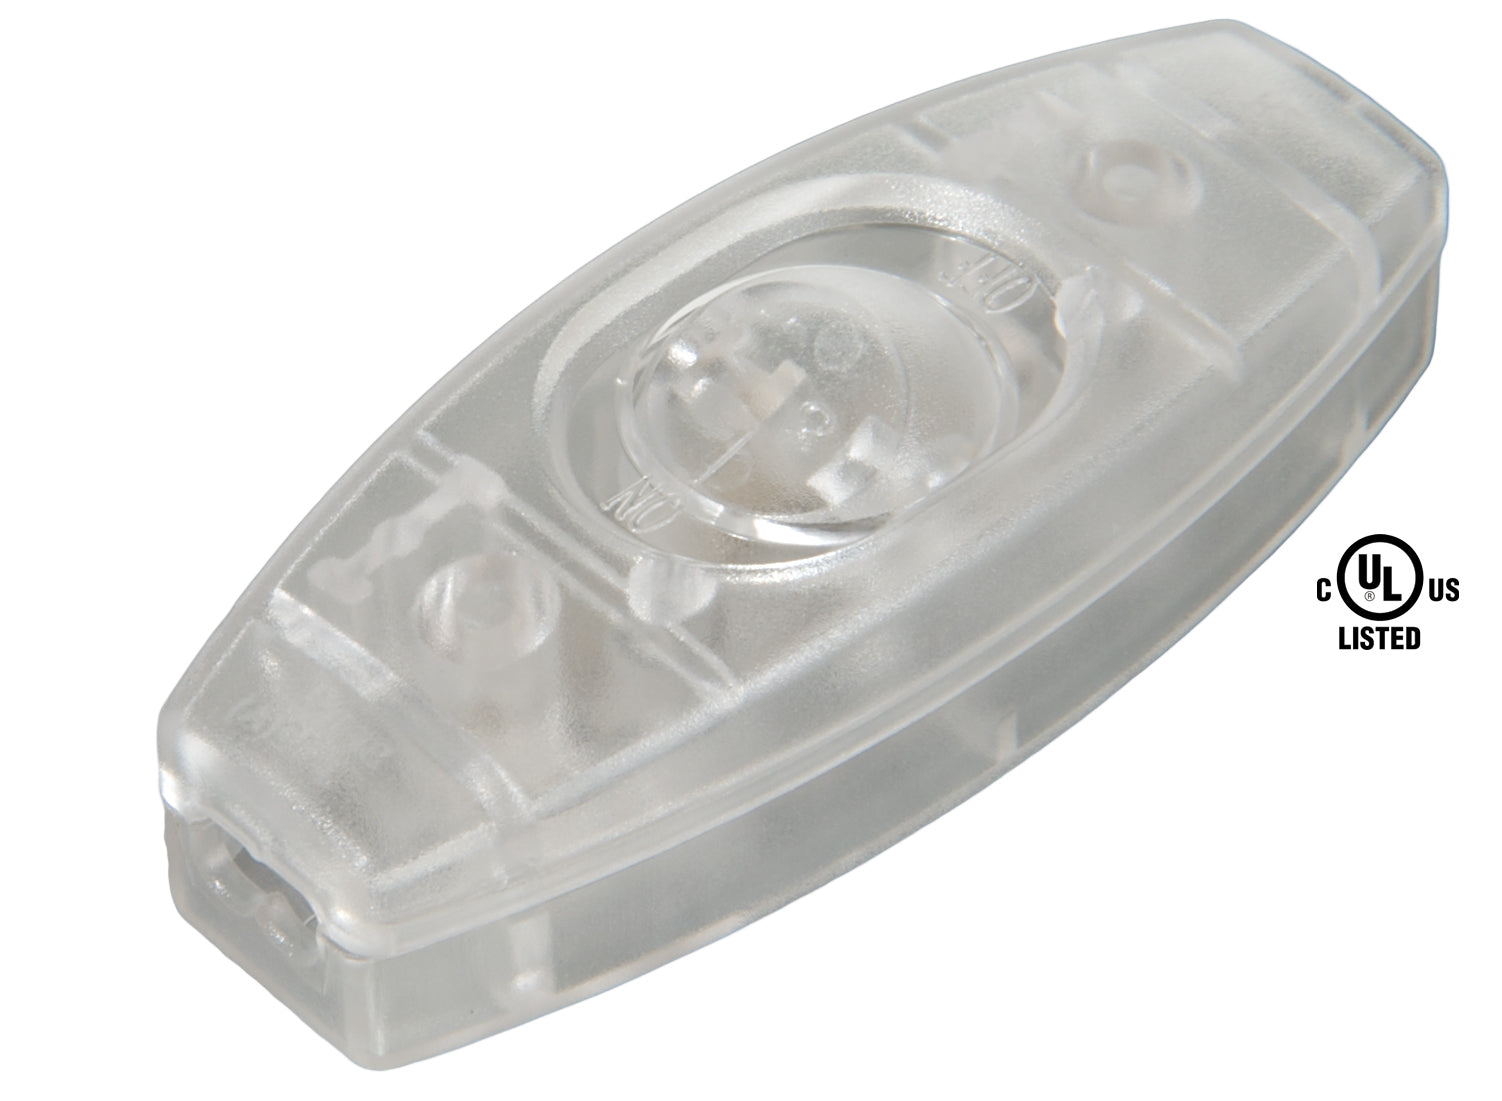 Clear, Transparent Inline ON-OFF Rocker Lamp Cord Switches, Choice to Fit SPT-1 or SPT-2 Lamp Cord